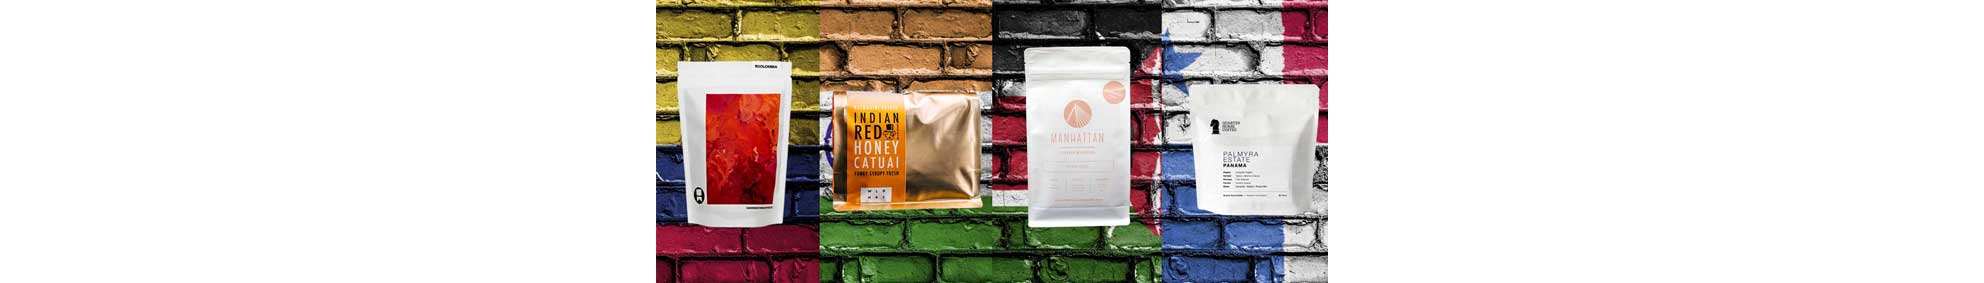 July Edition of UK Best Coffee Subscription